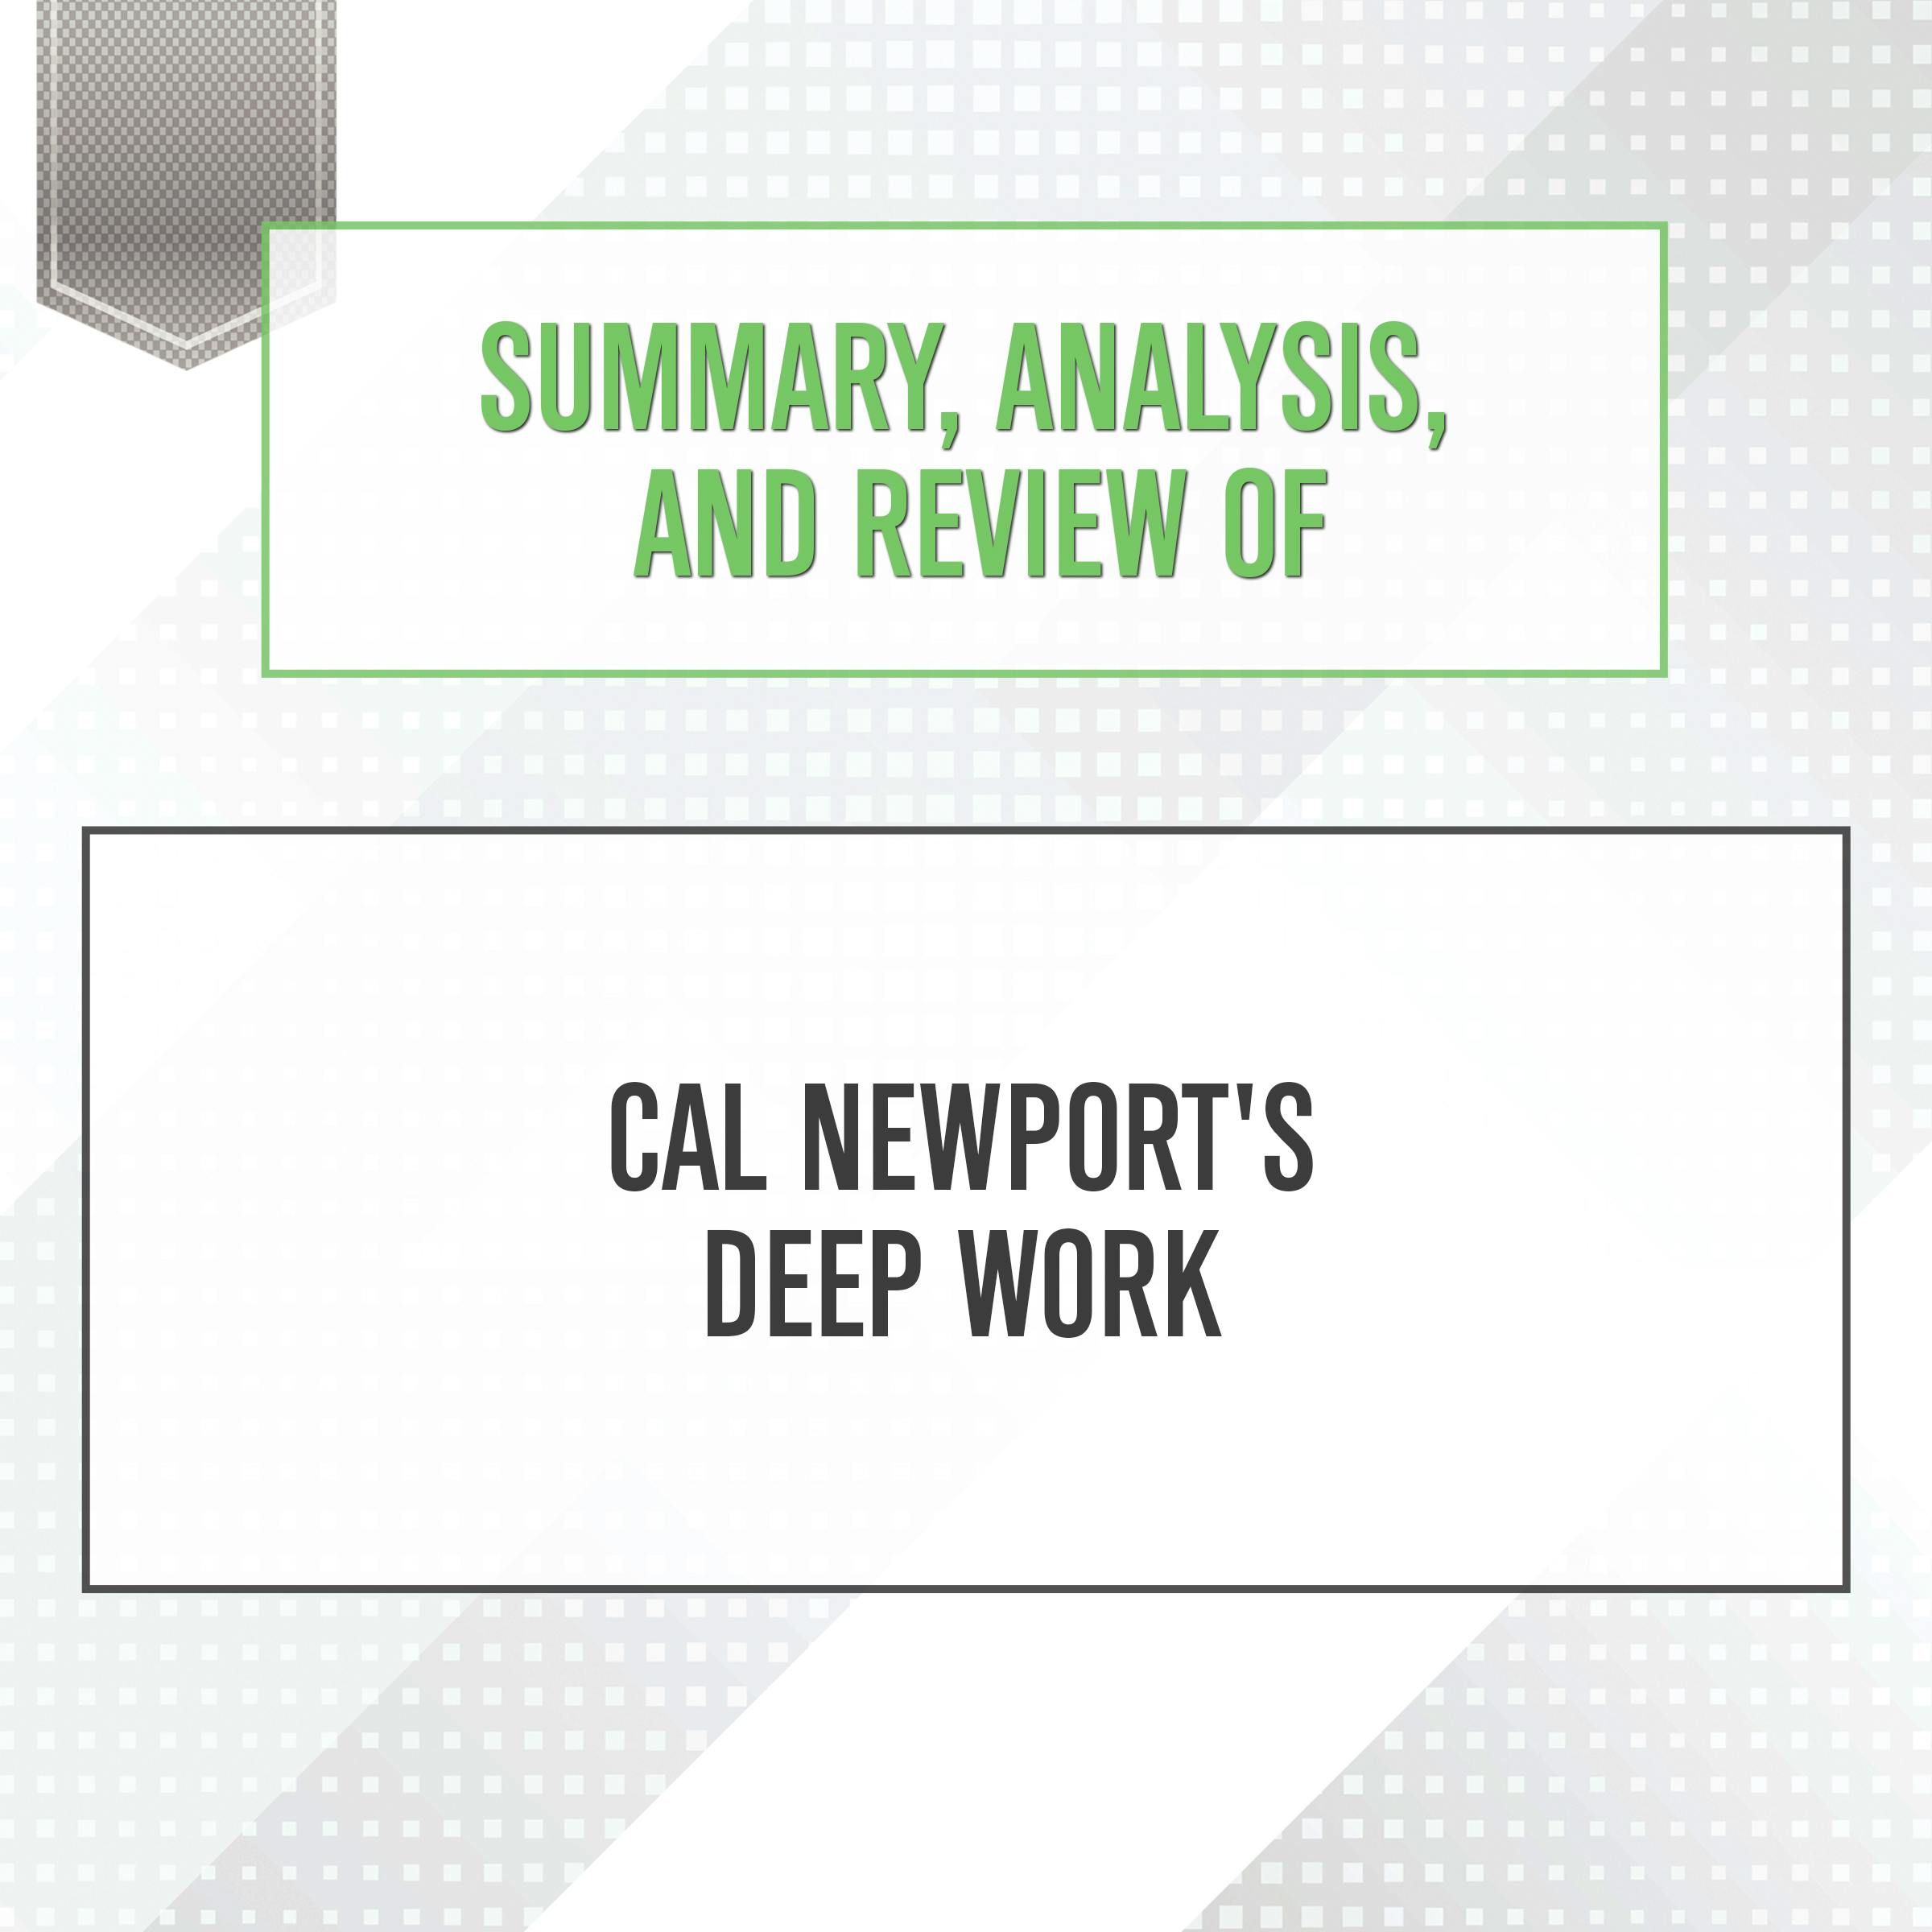 Deep Work Summary of Key Ideas and Review